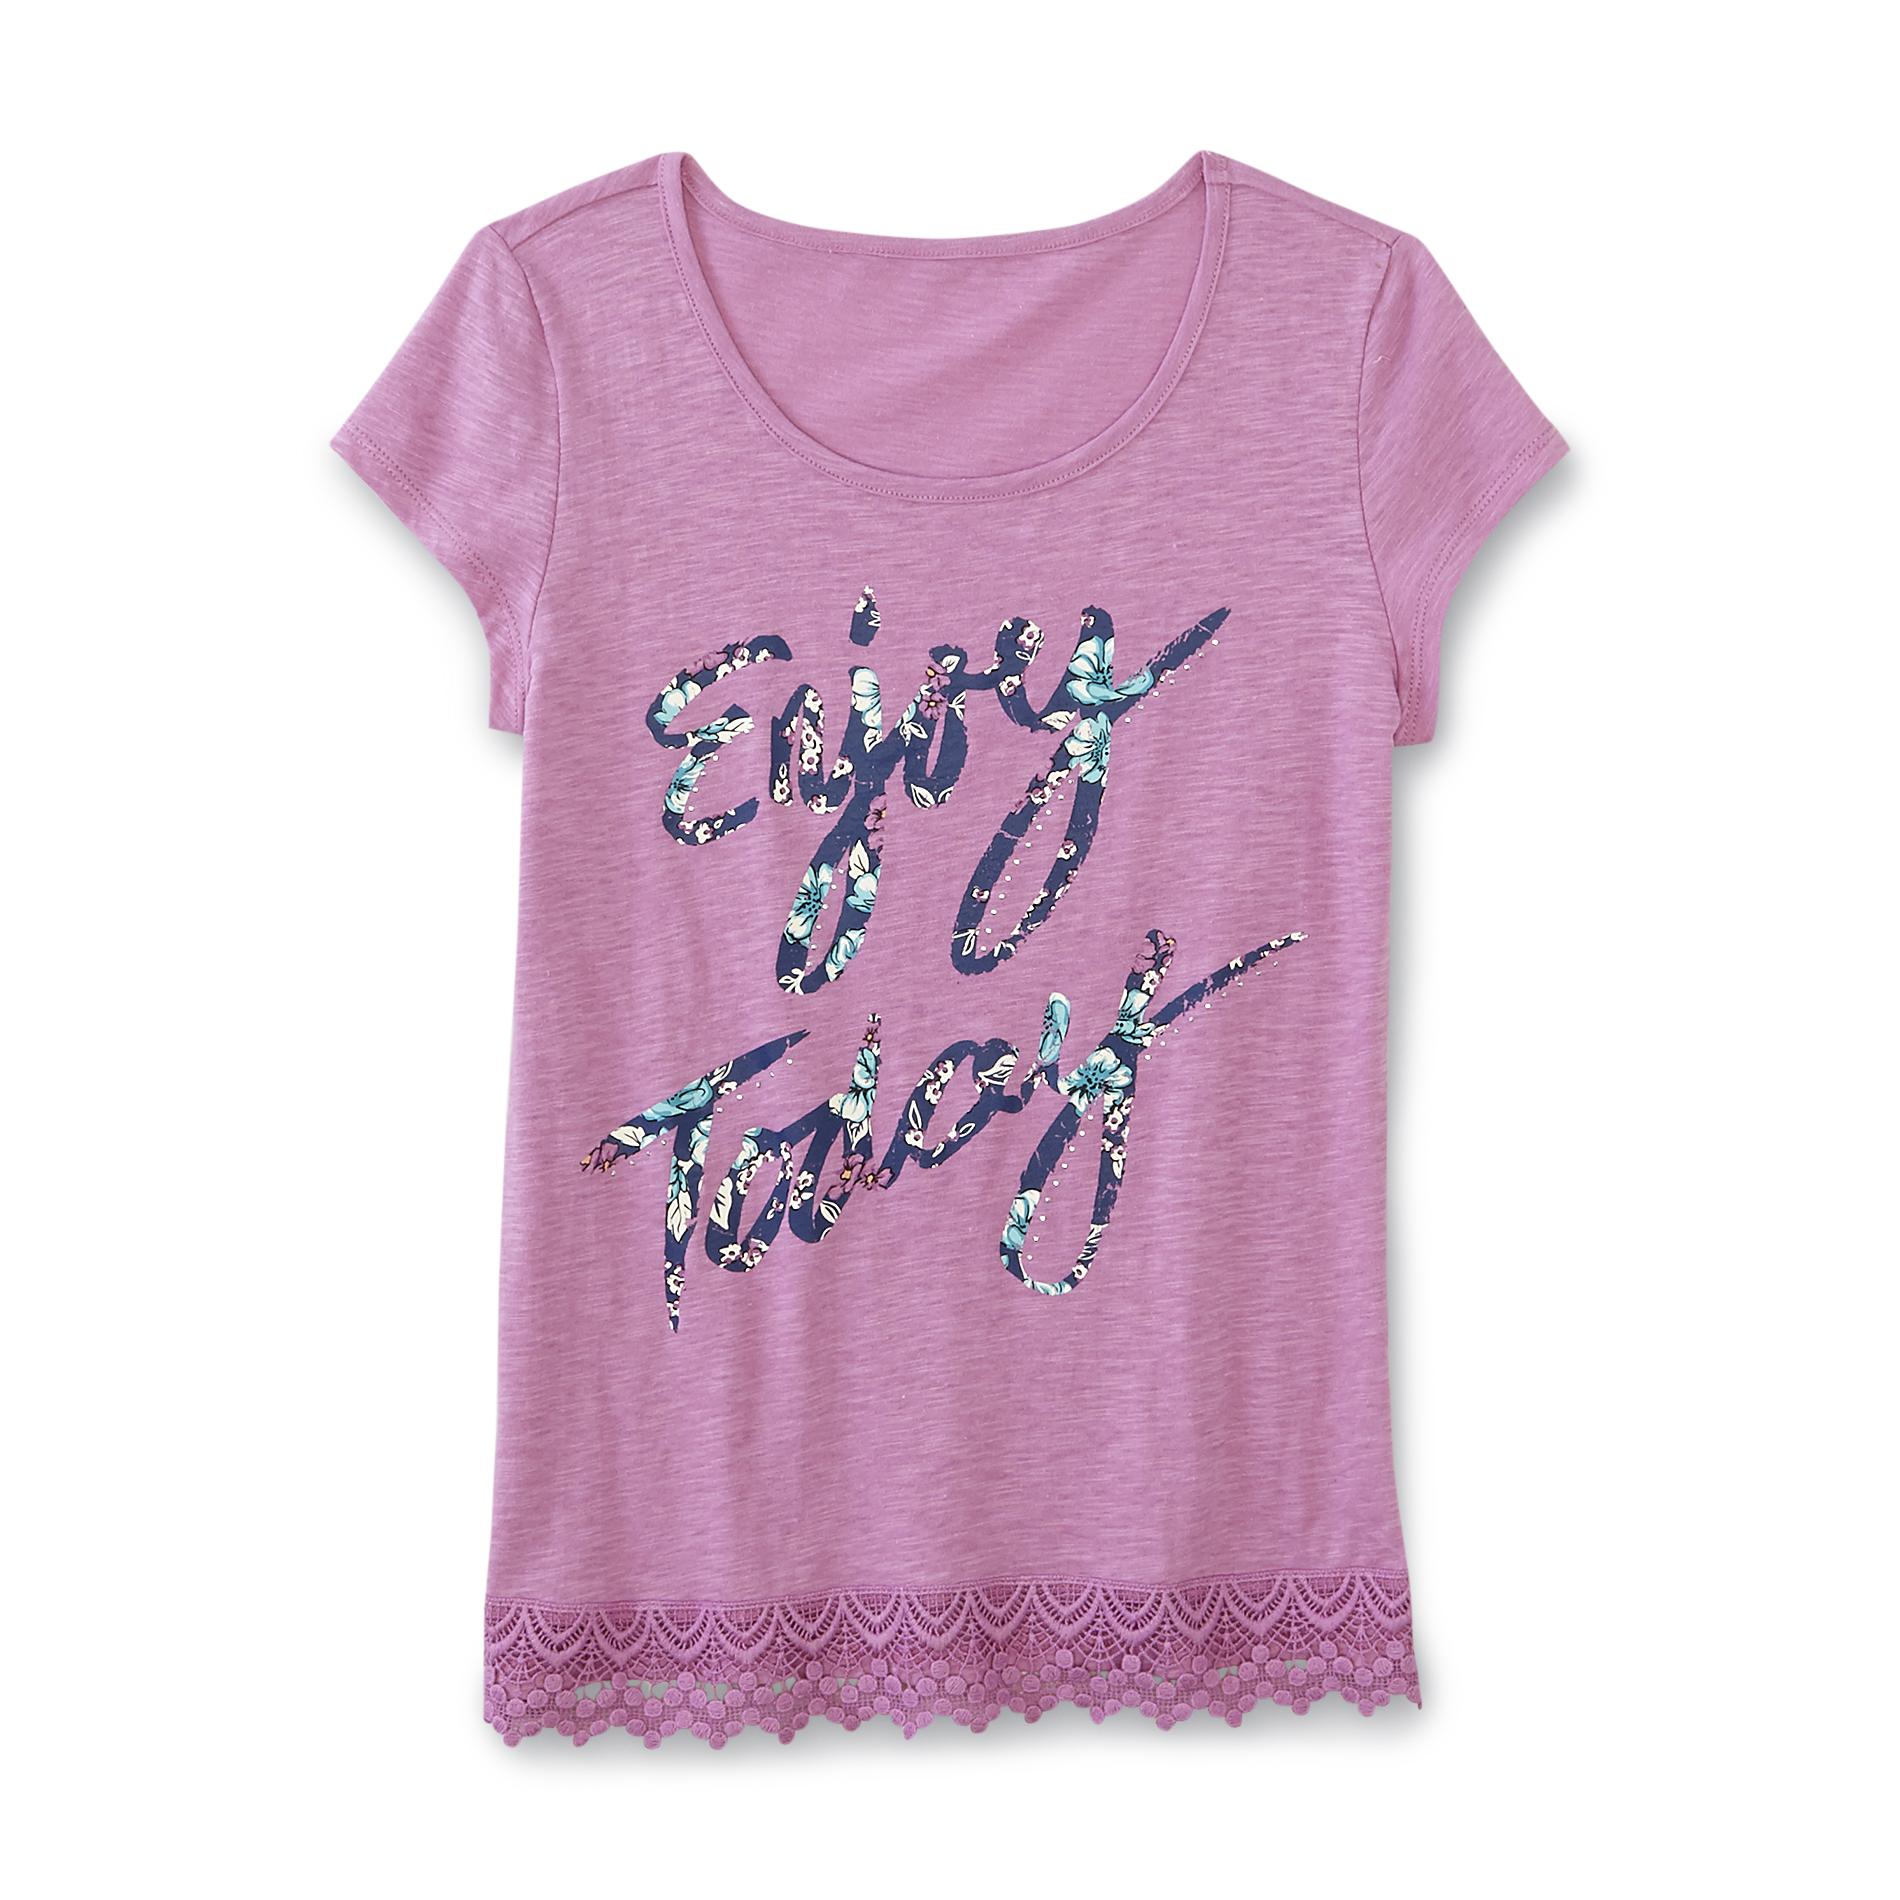 Canyon River Blues Girl's Graphic T-Shirt - Enjoy Today